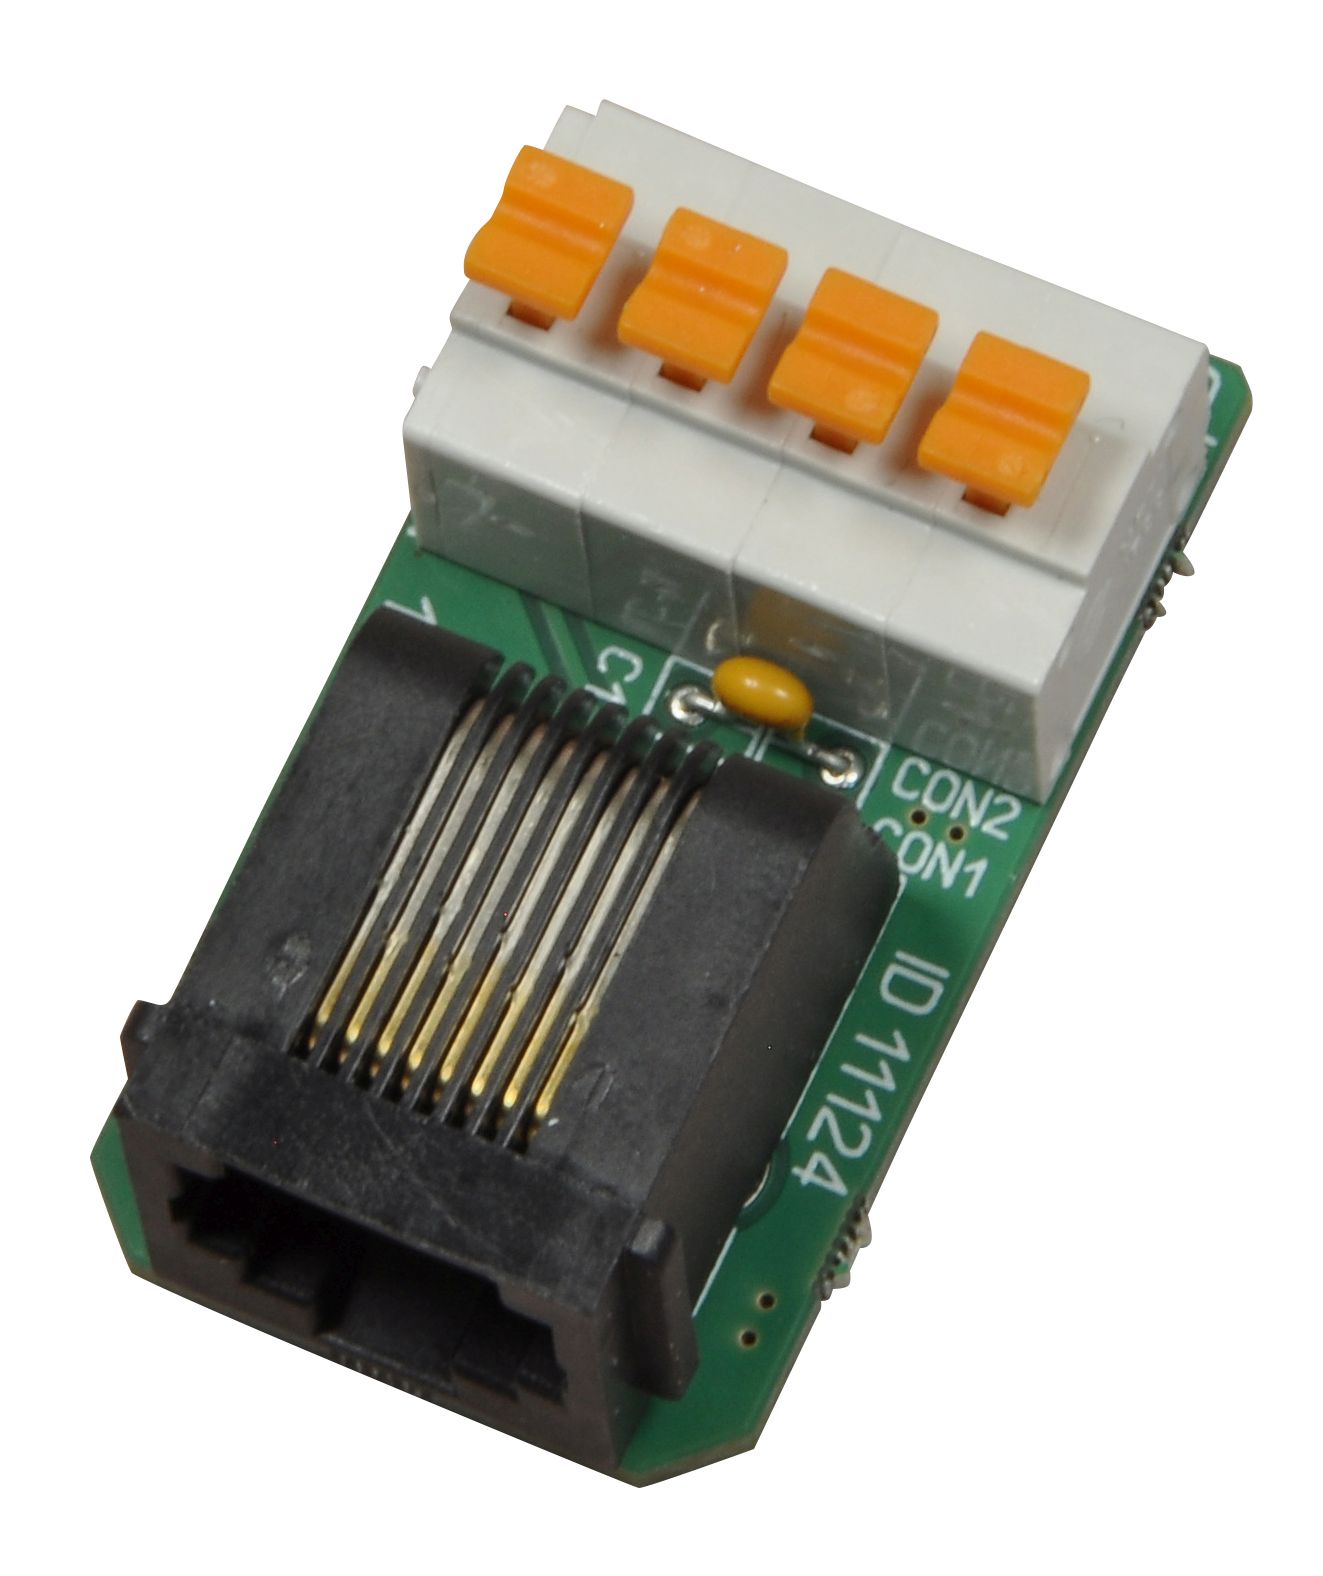 1-Wire Adapter 2, RJ45 to screw terminal